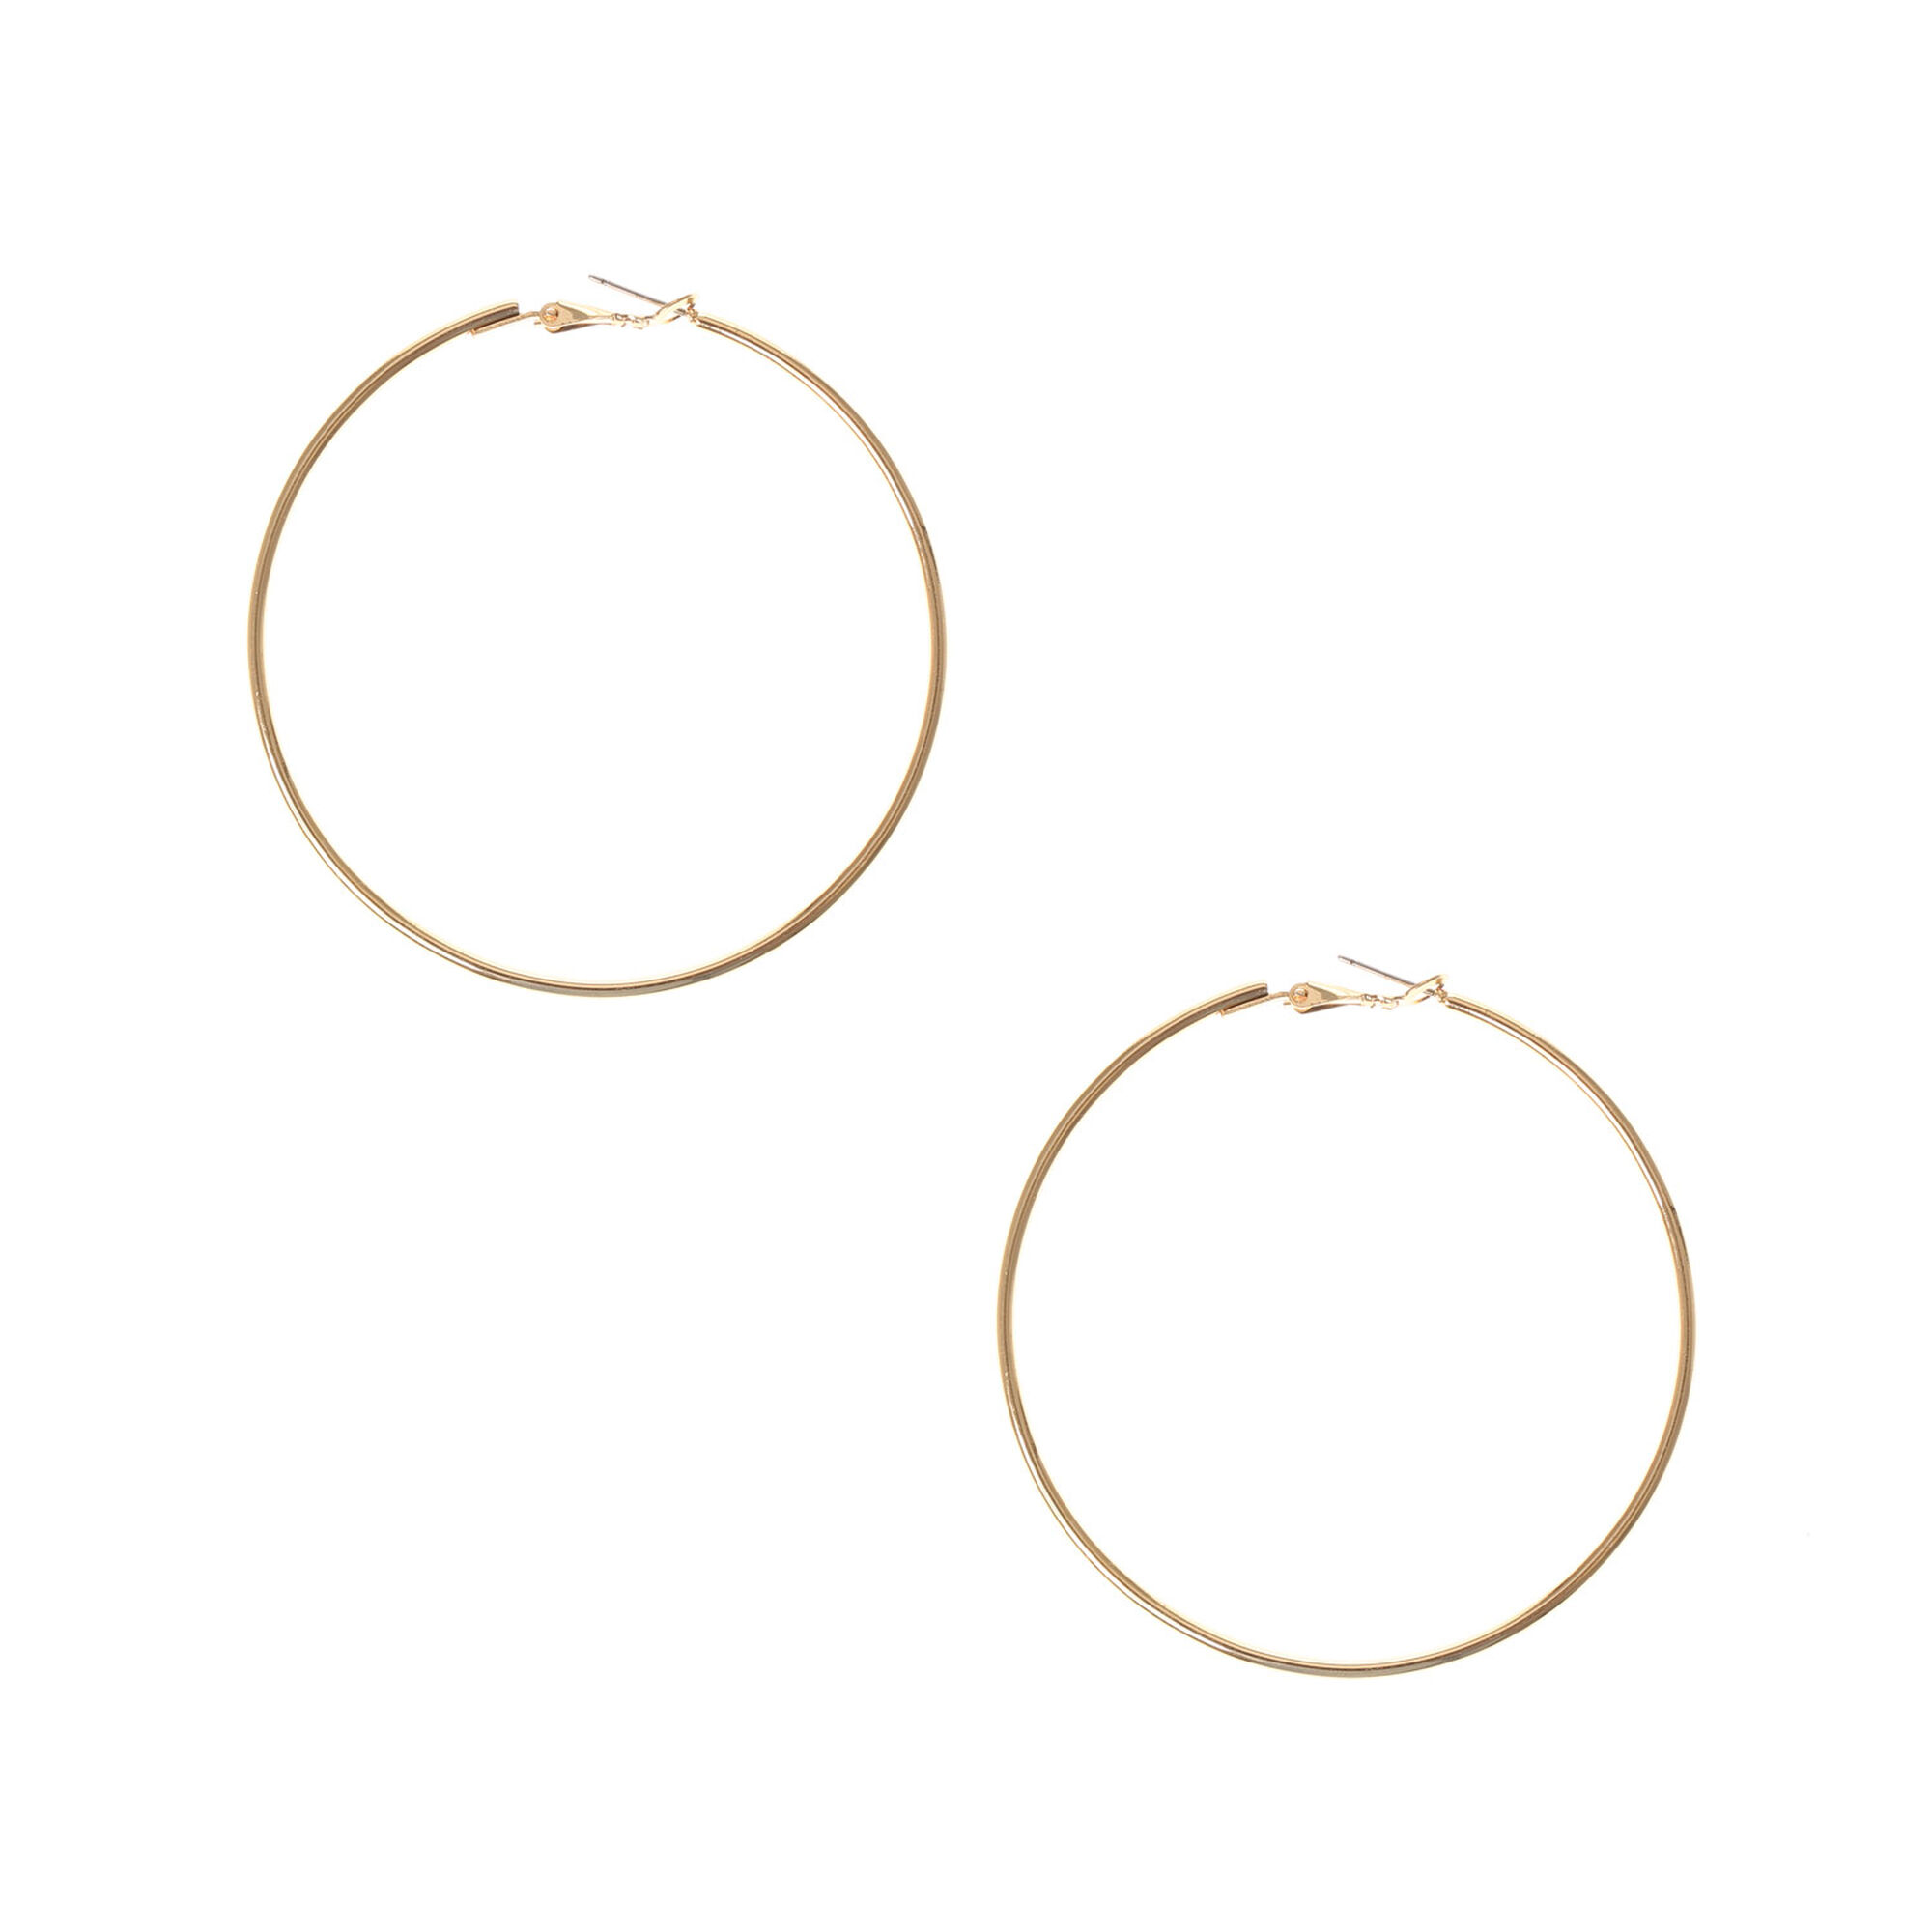 View Claires Tone 70MM Hoop Earrings Gold information